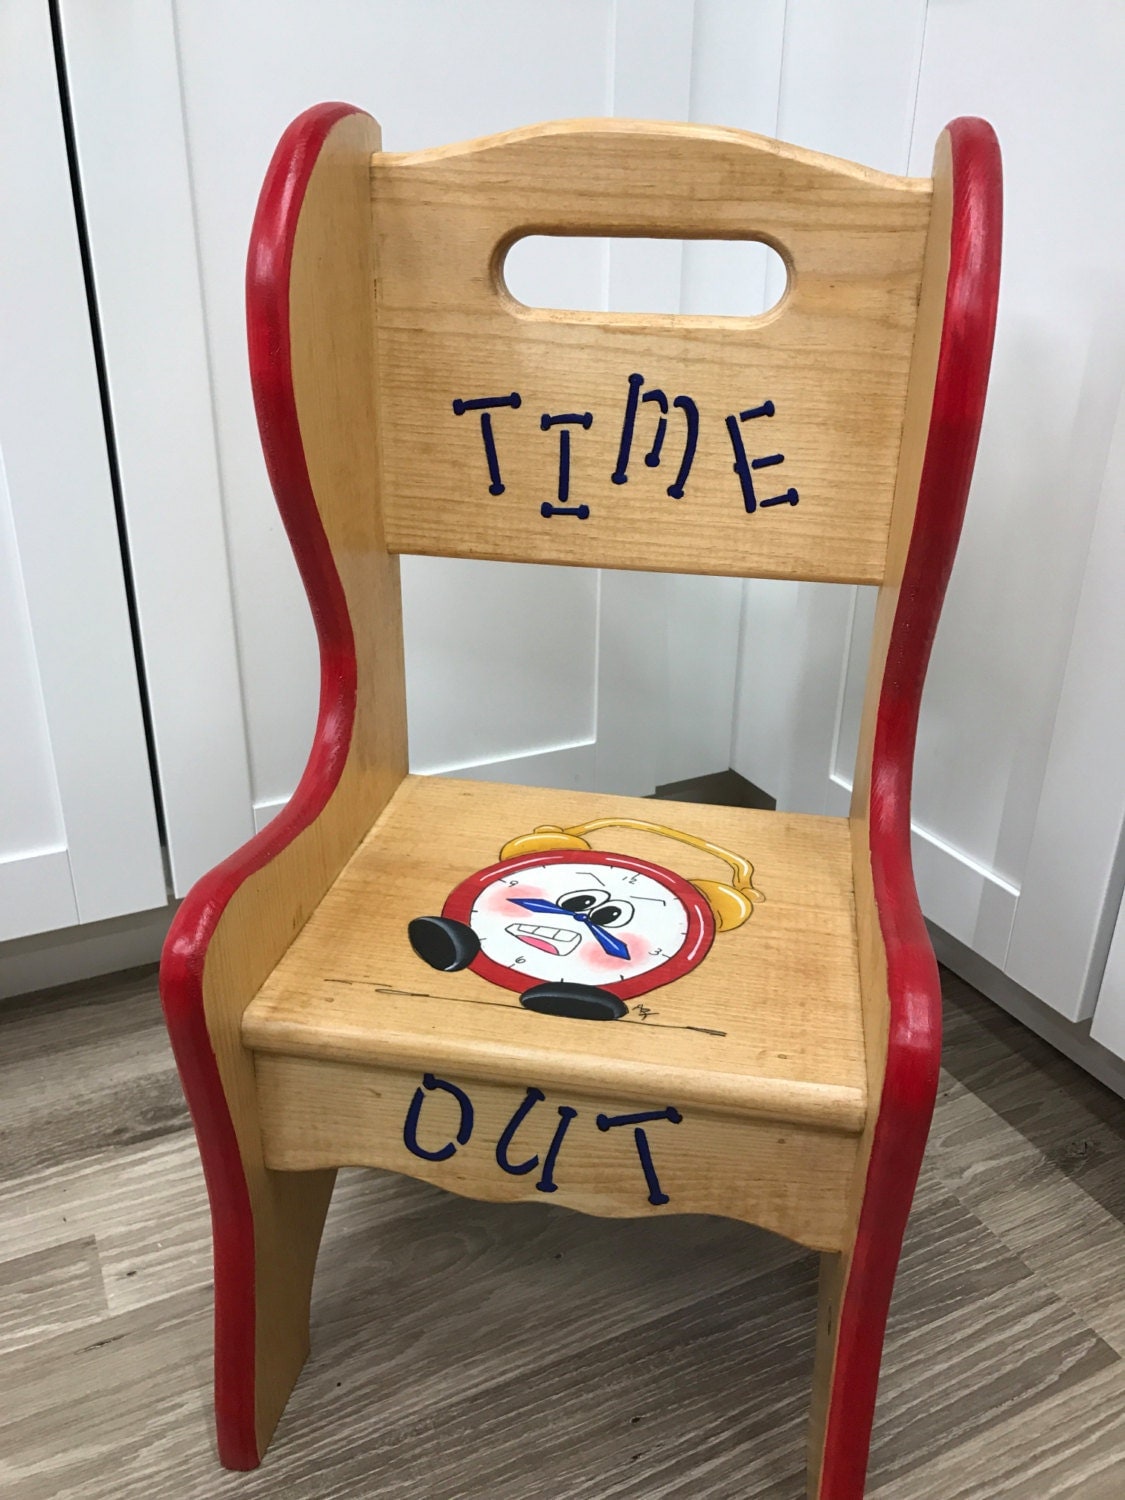 time out chair for toddlers